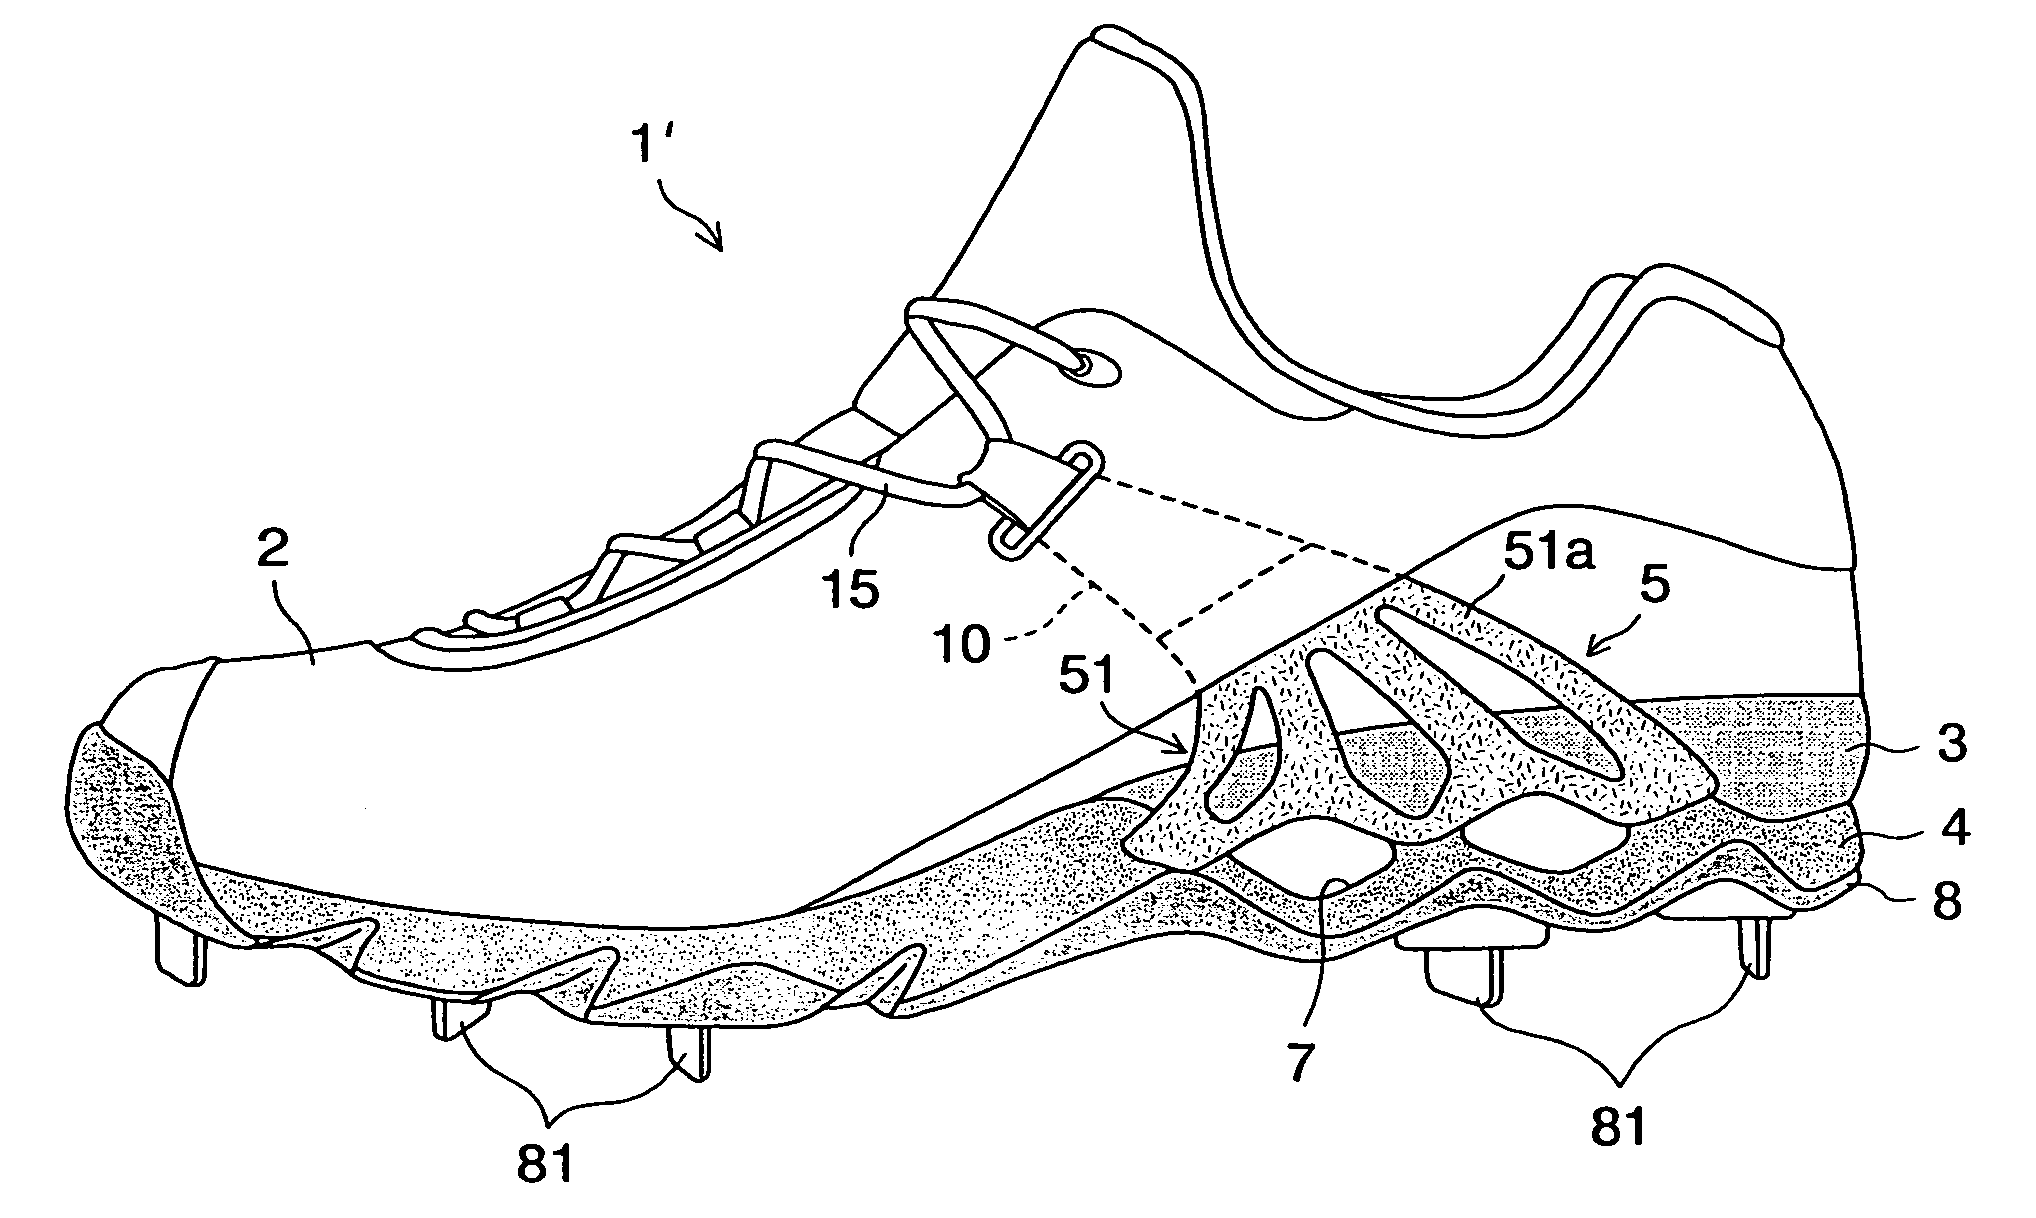 Midsole structure for an athletic shoe